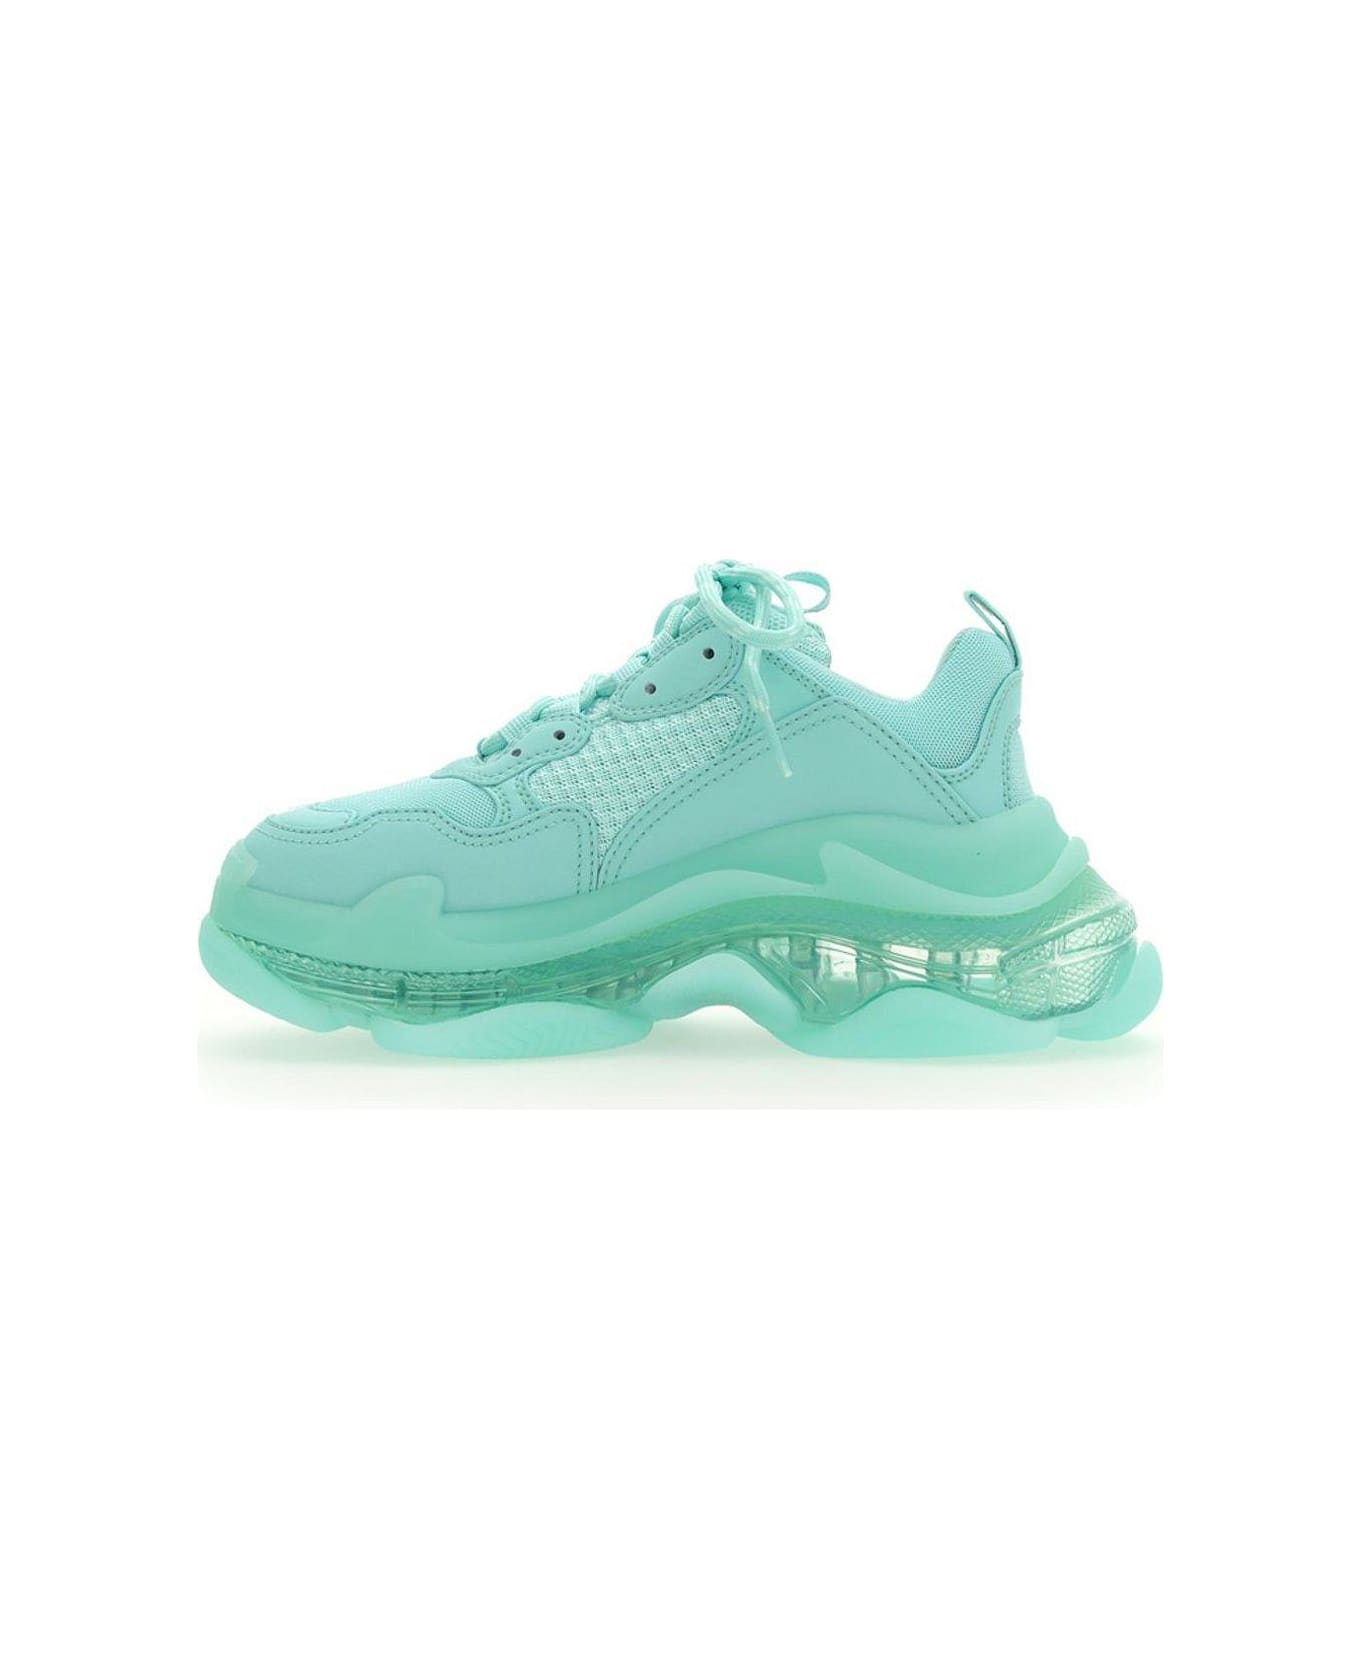 Balenciaga Triple S Lace-up Chunky Sneakers - Green スニーカー